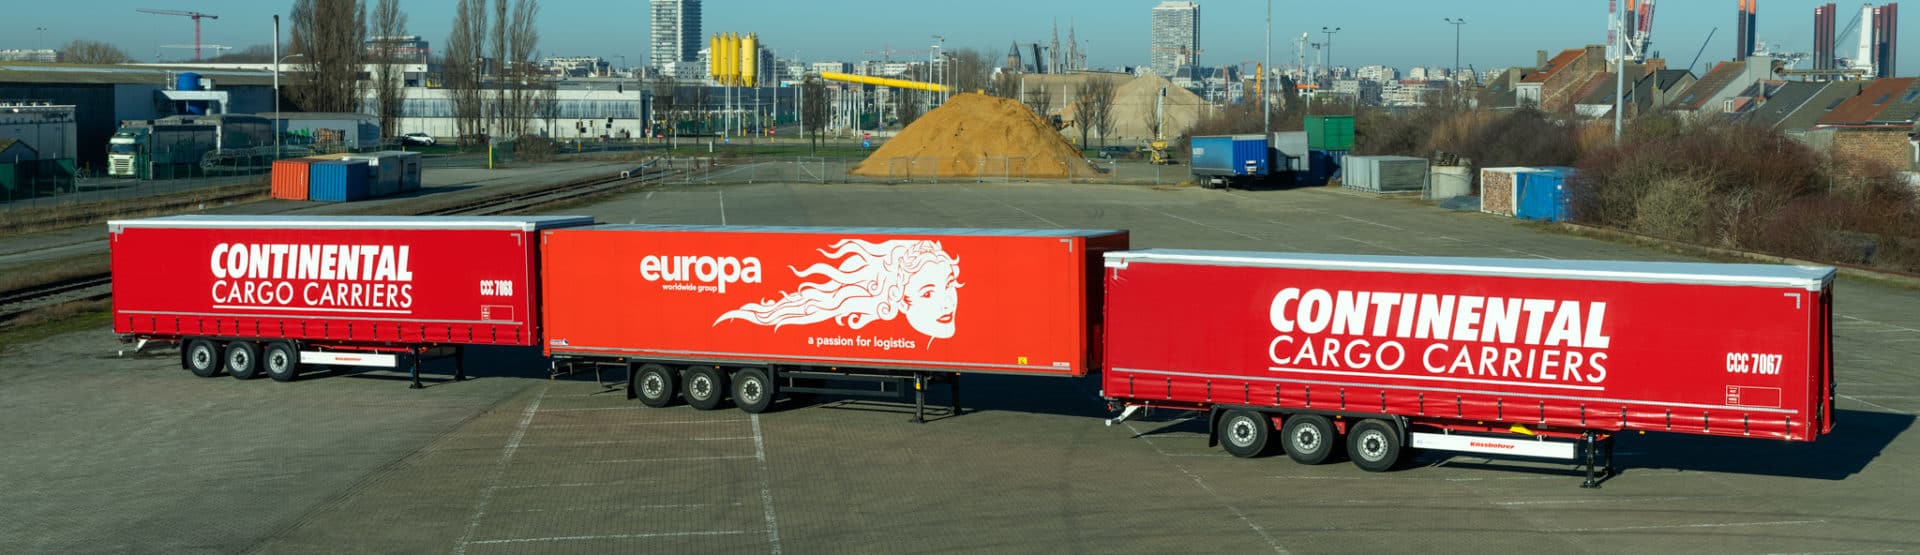 Continental Cargo Carriers and Europa Worldwide Trucks